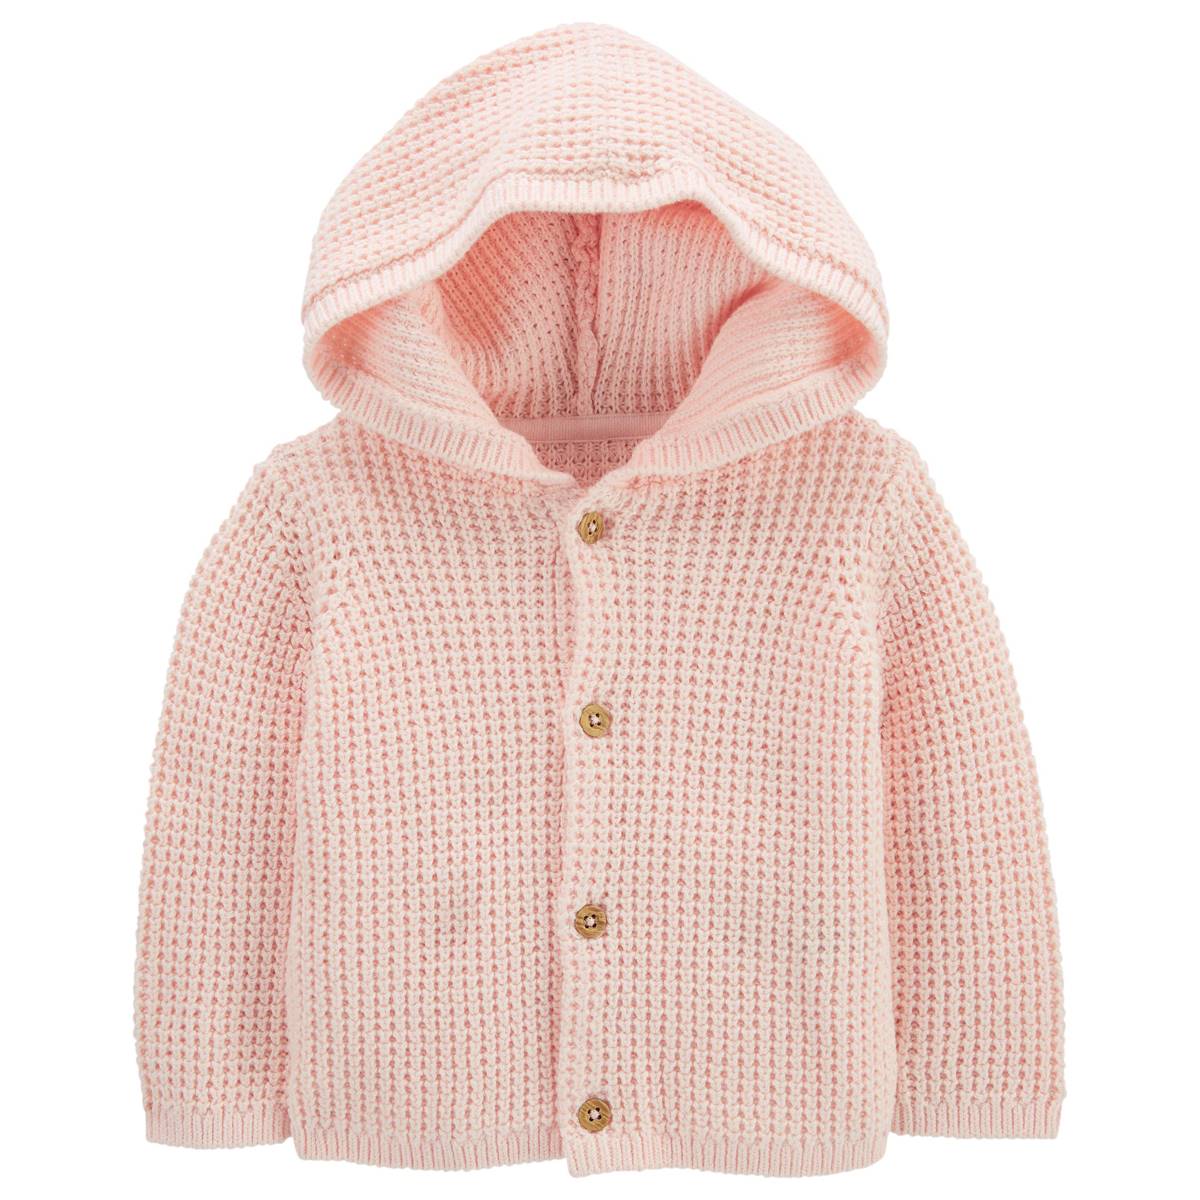 Baby Girl (NB-12M) Carter's(R) Knit Hooded Cardigan - Light Pink